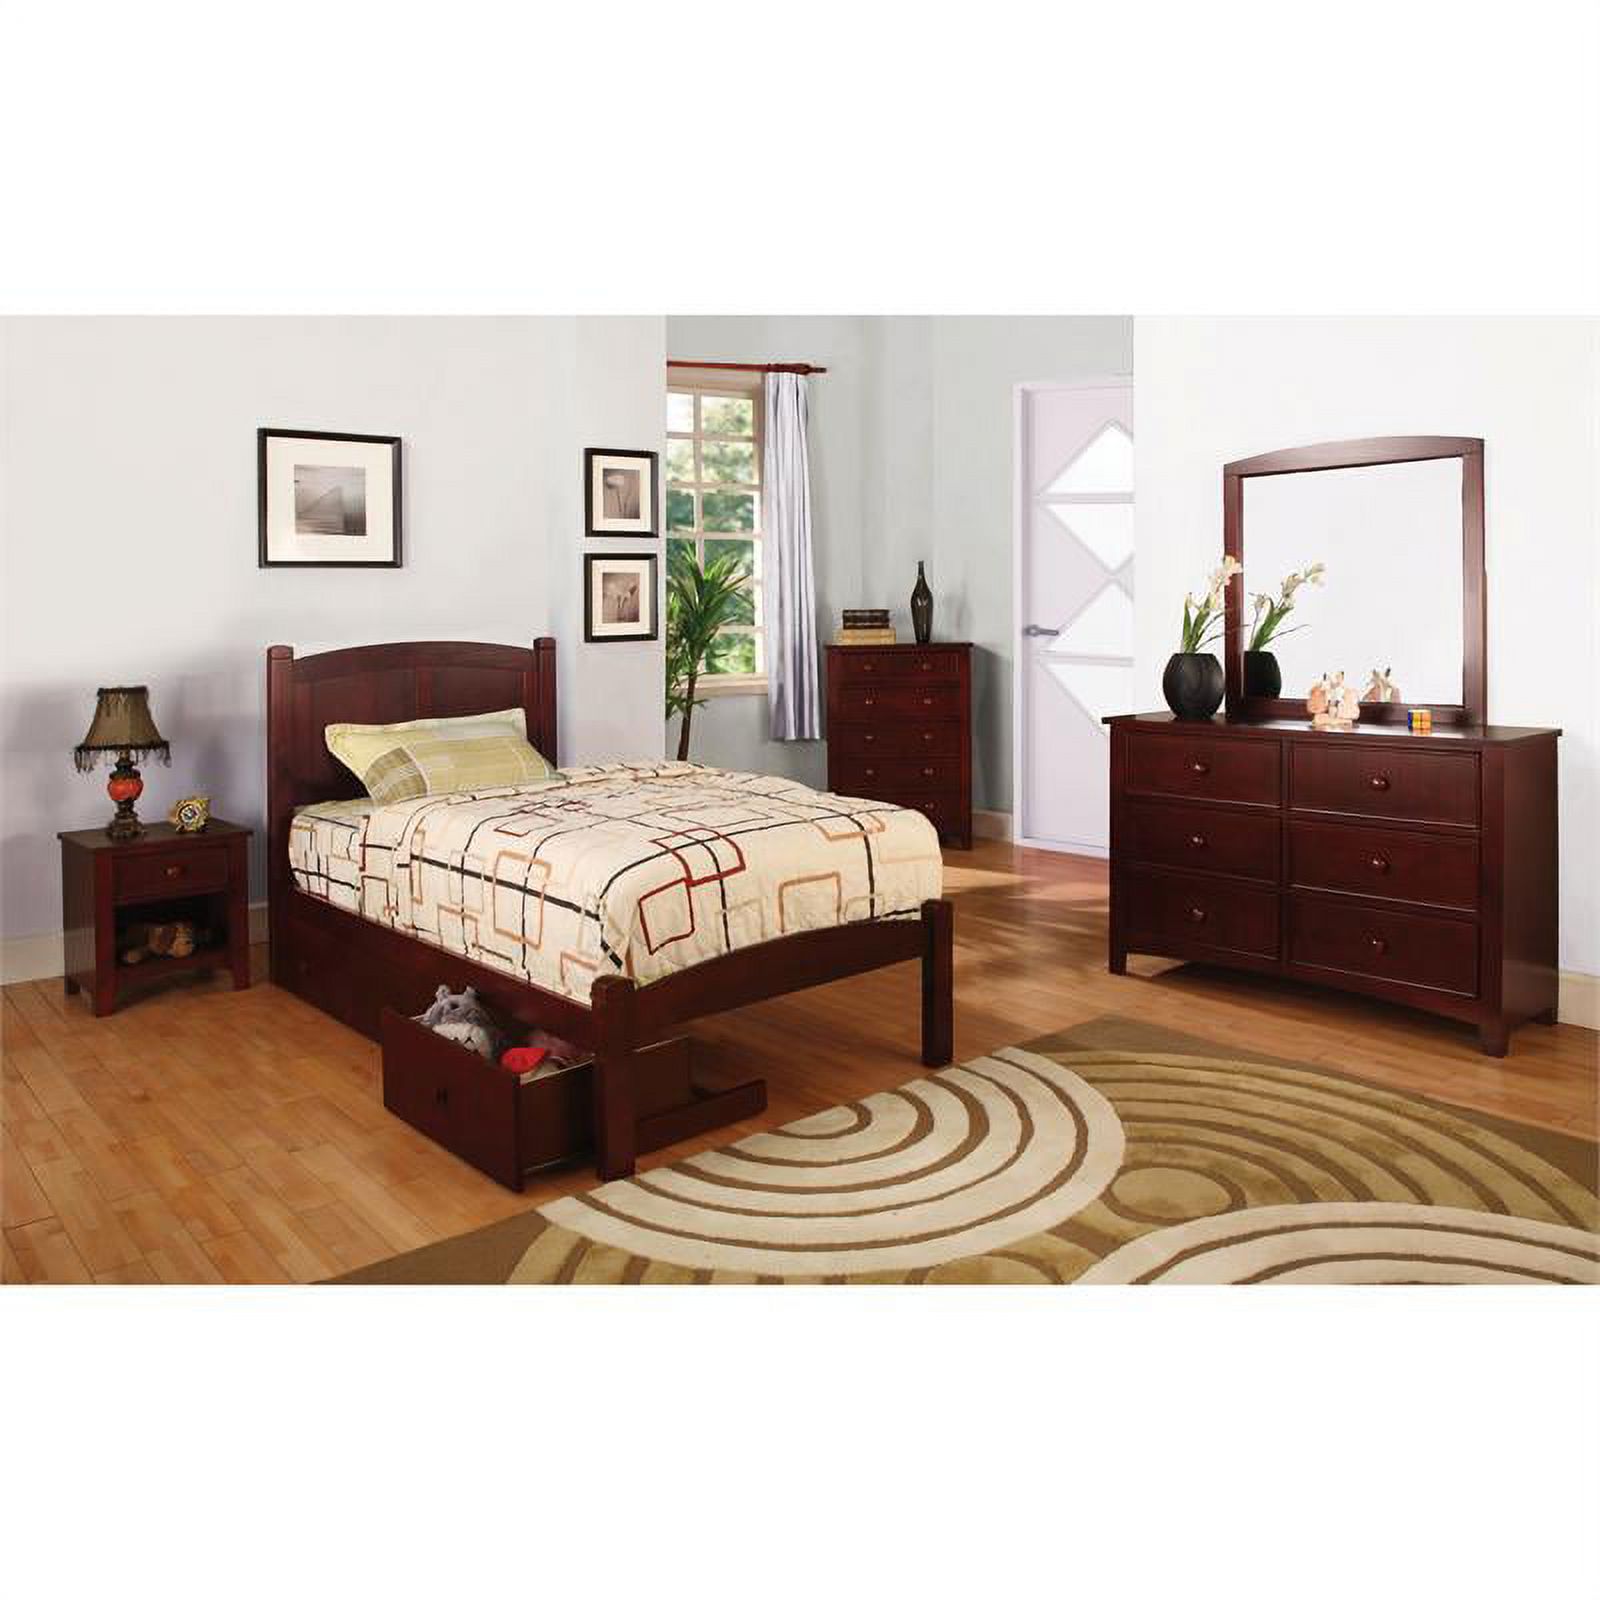 Furniture of America Gosney Cottage Wood Underbed Drawers in Cherry (Set of 3) - image 4 of 4